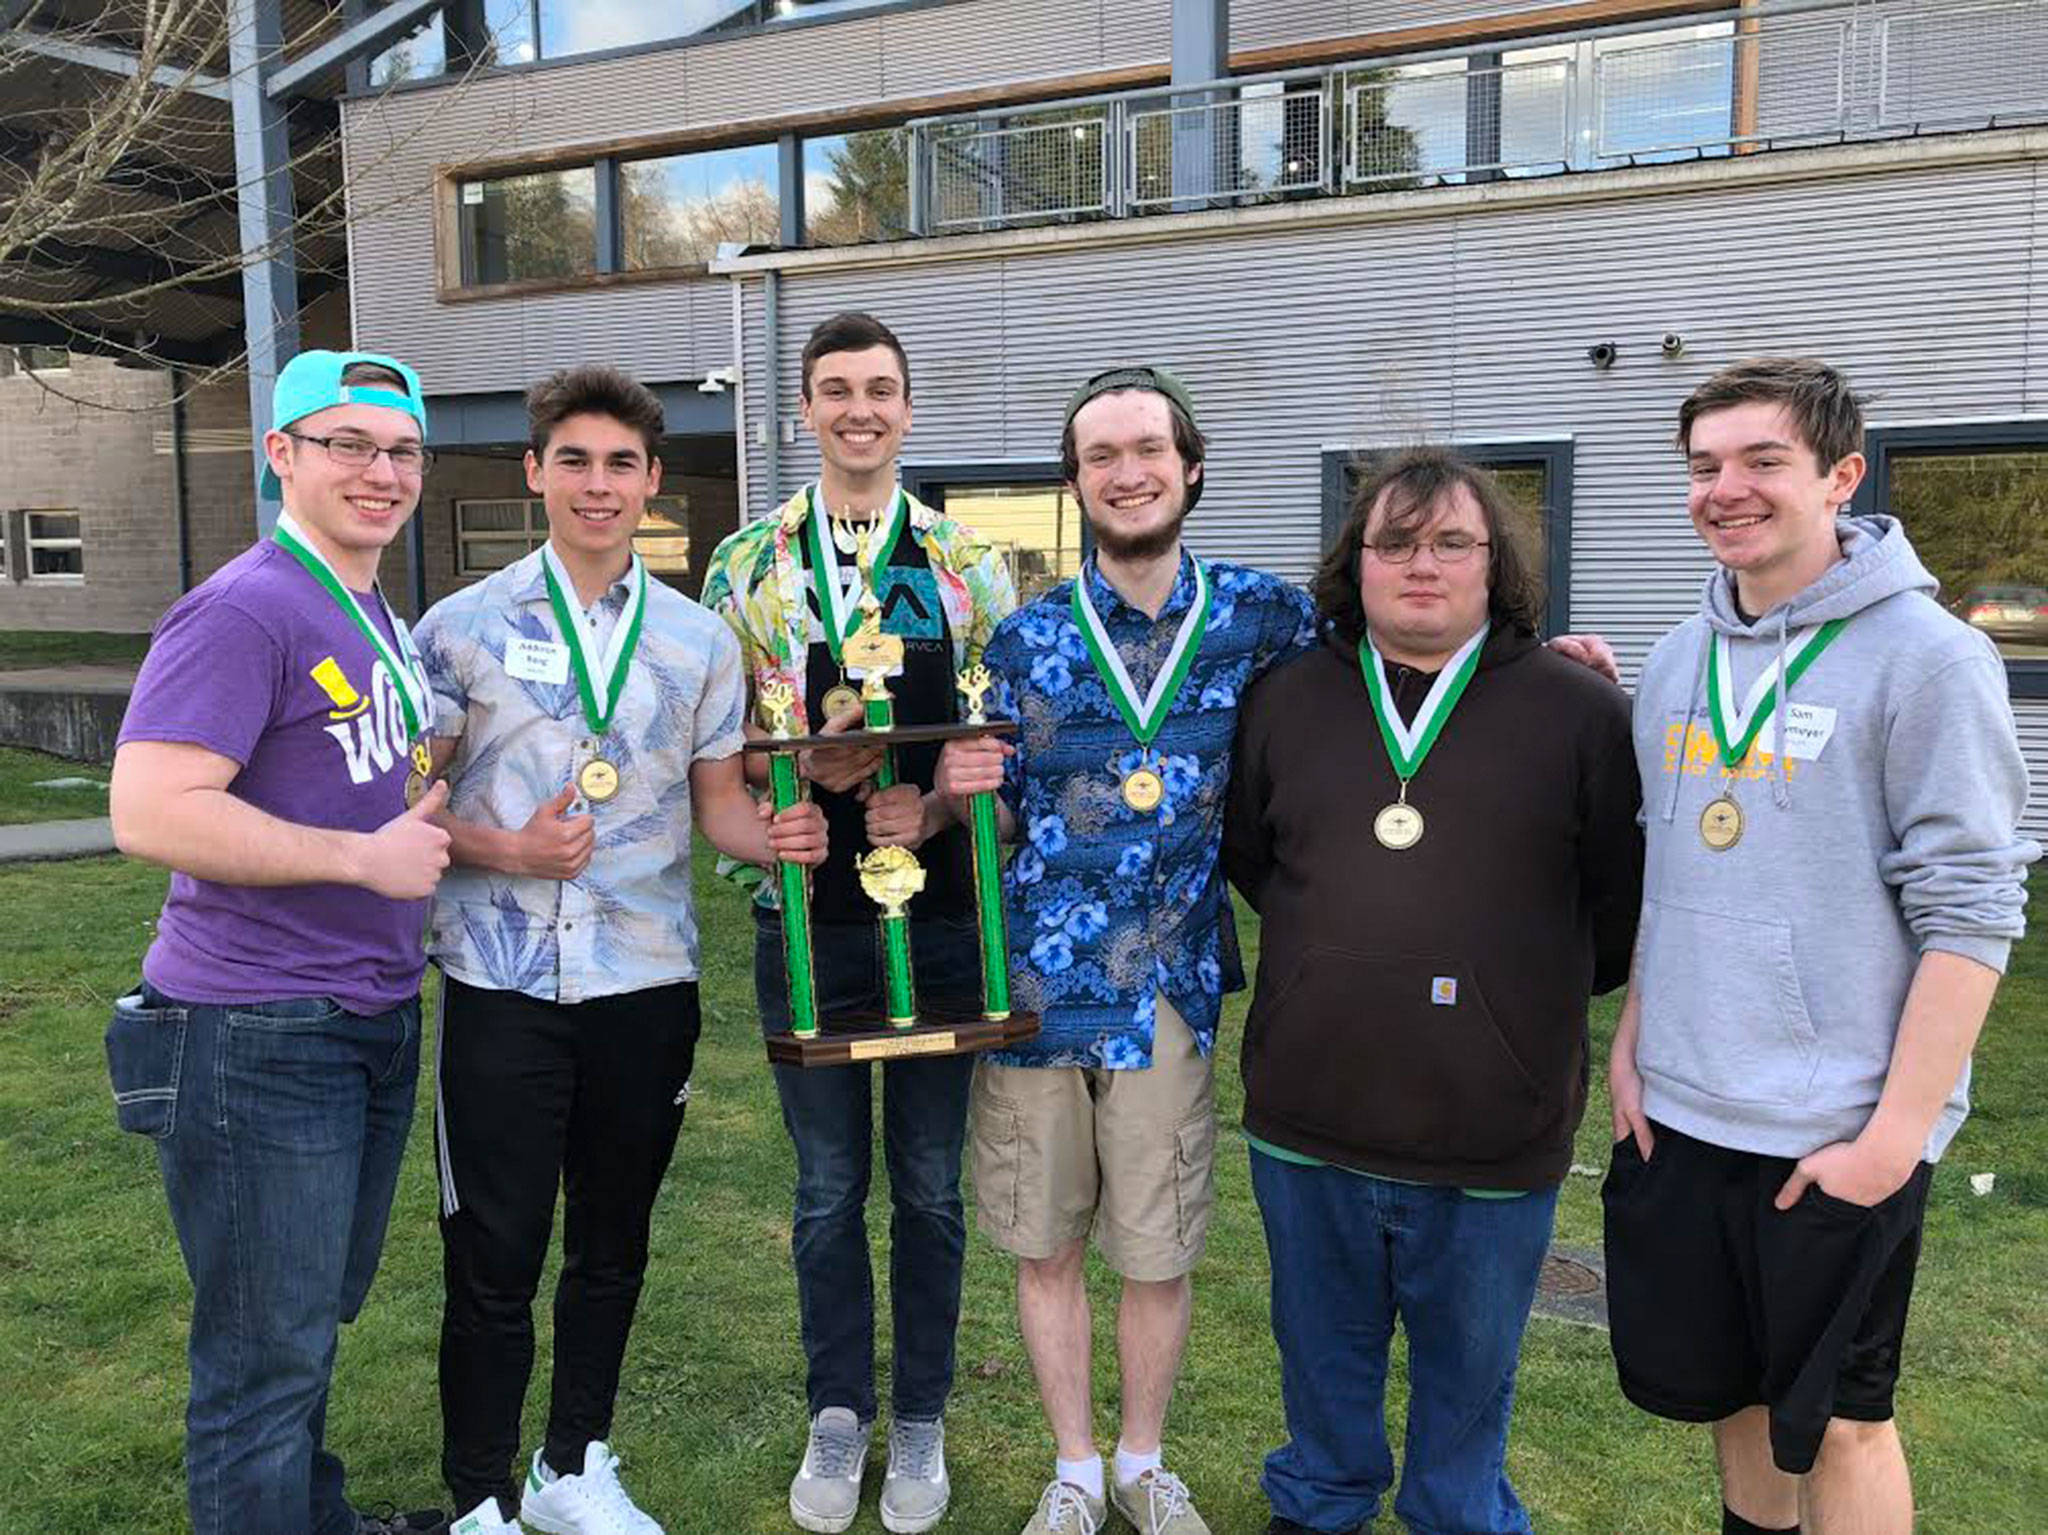 Sequim High School seniors Joe Benjamin, left, Addison Berg, Liam Stevenson, Devin Hibler, John Purvis and sophomore Sam Frymyer celebrate their win as Knowledge Bowl State Champions on March 17 at Arlington High School. Submitted photo